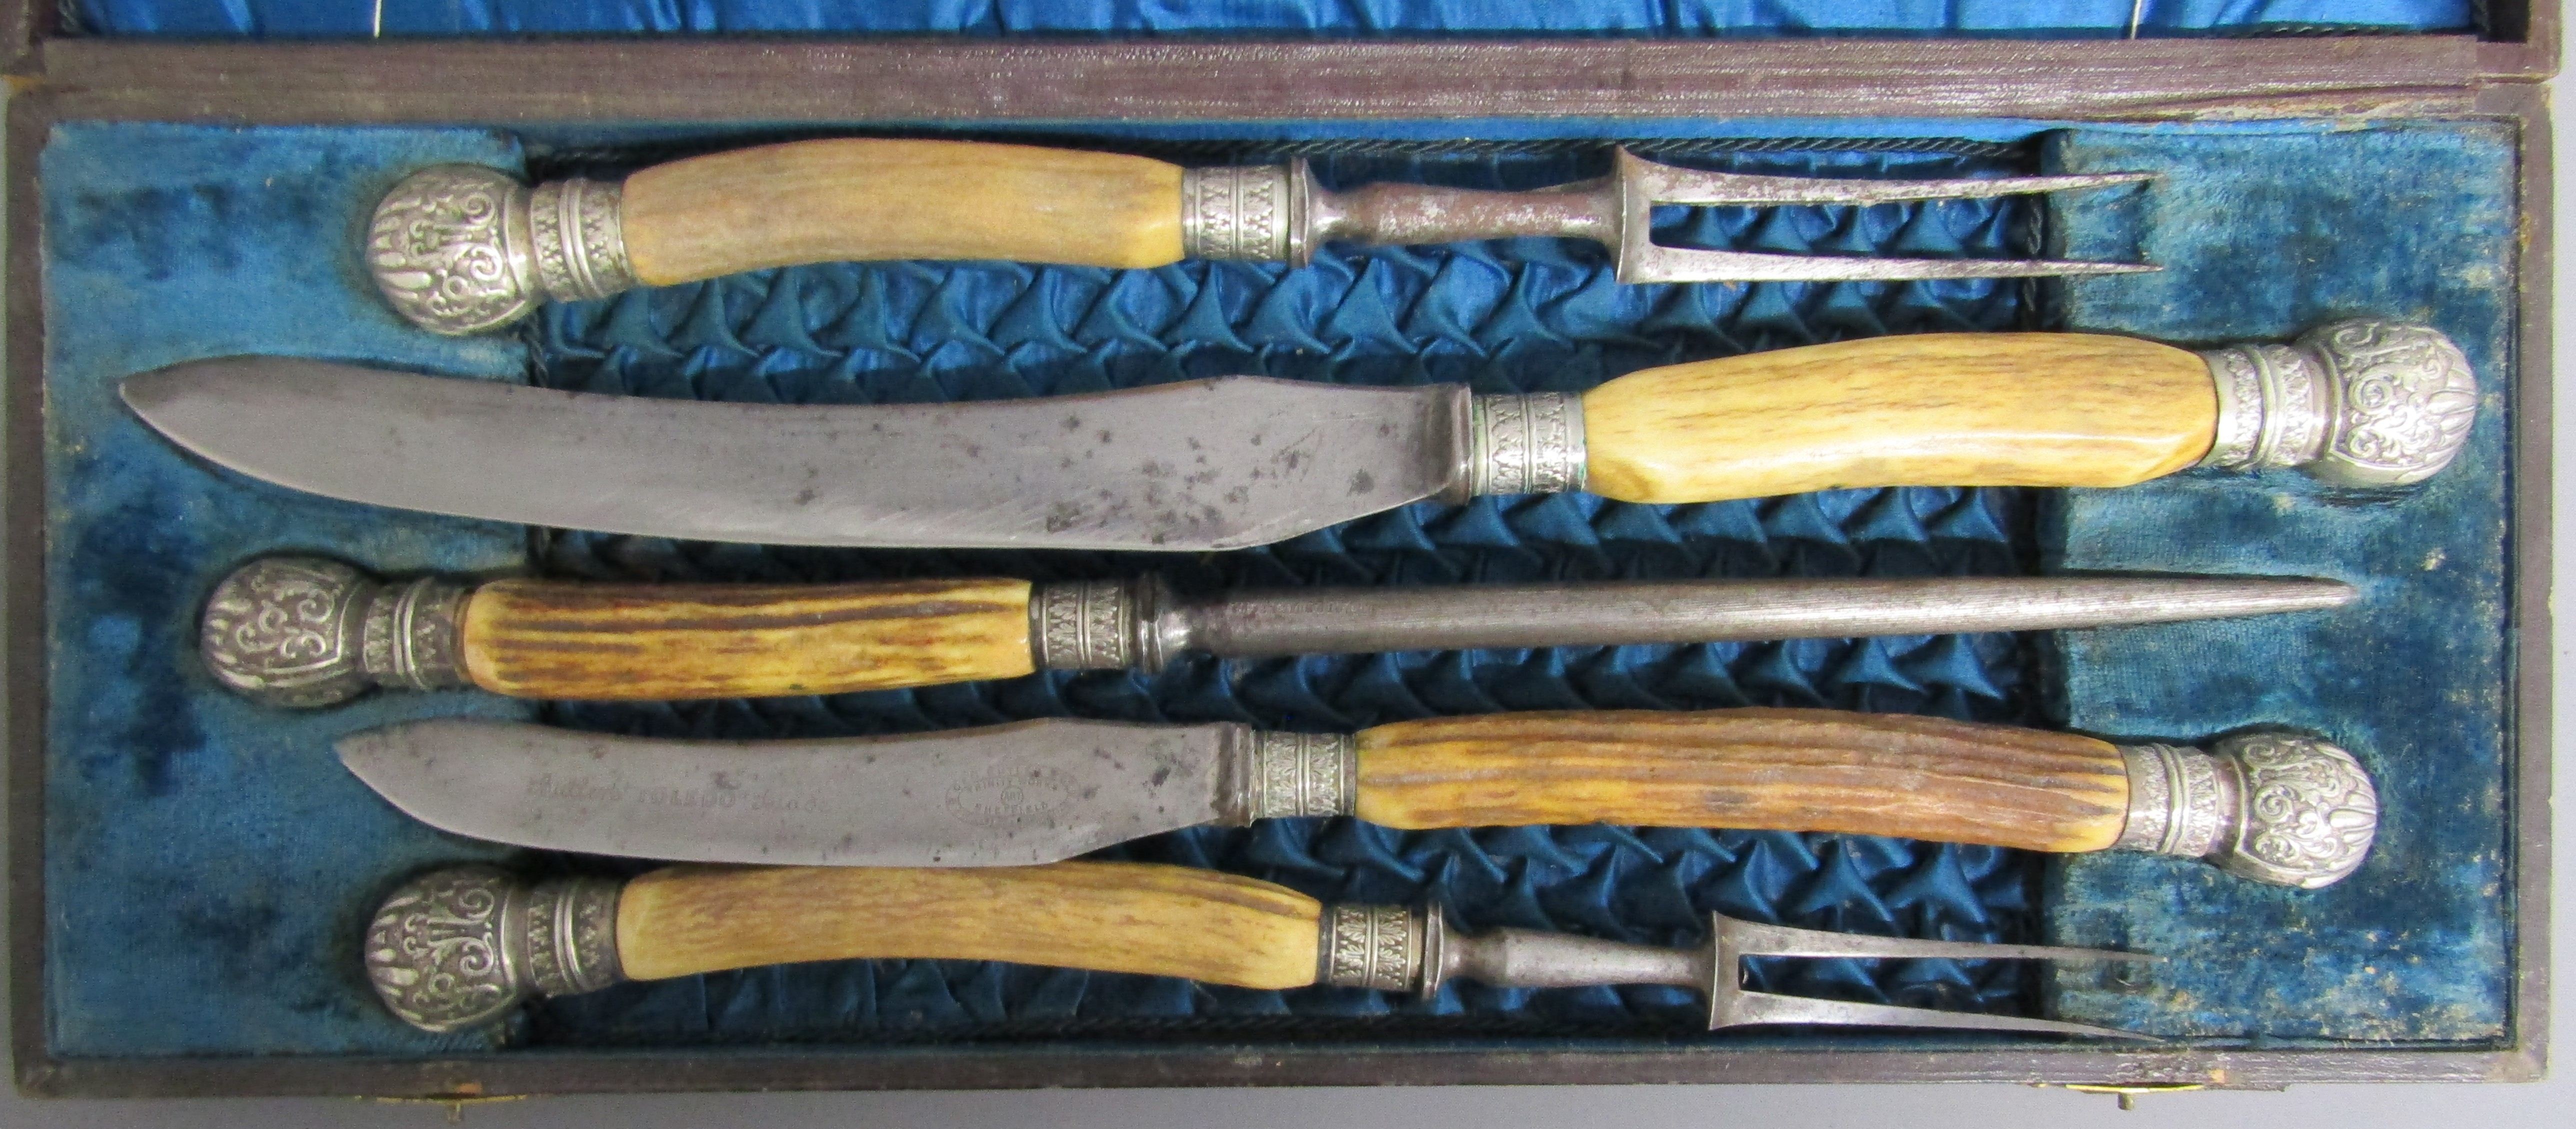 Cased George Butler & Co 'Toledo' 5 piece carving set with horn handle and decorated finials - Image 2 of 3